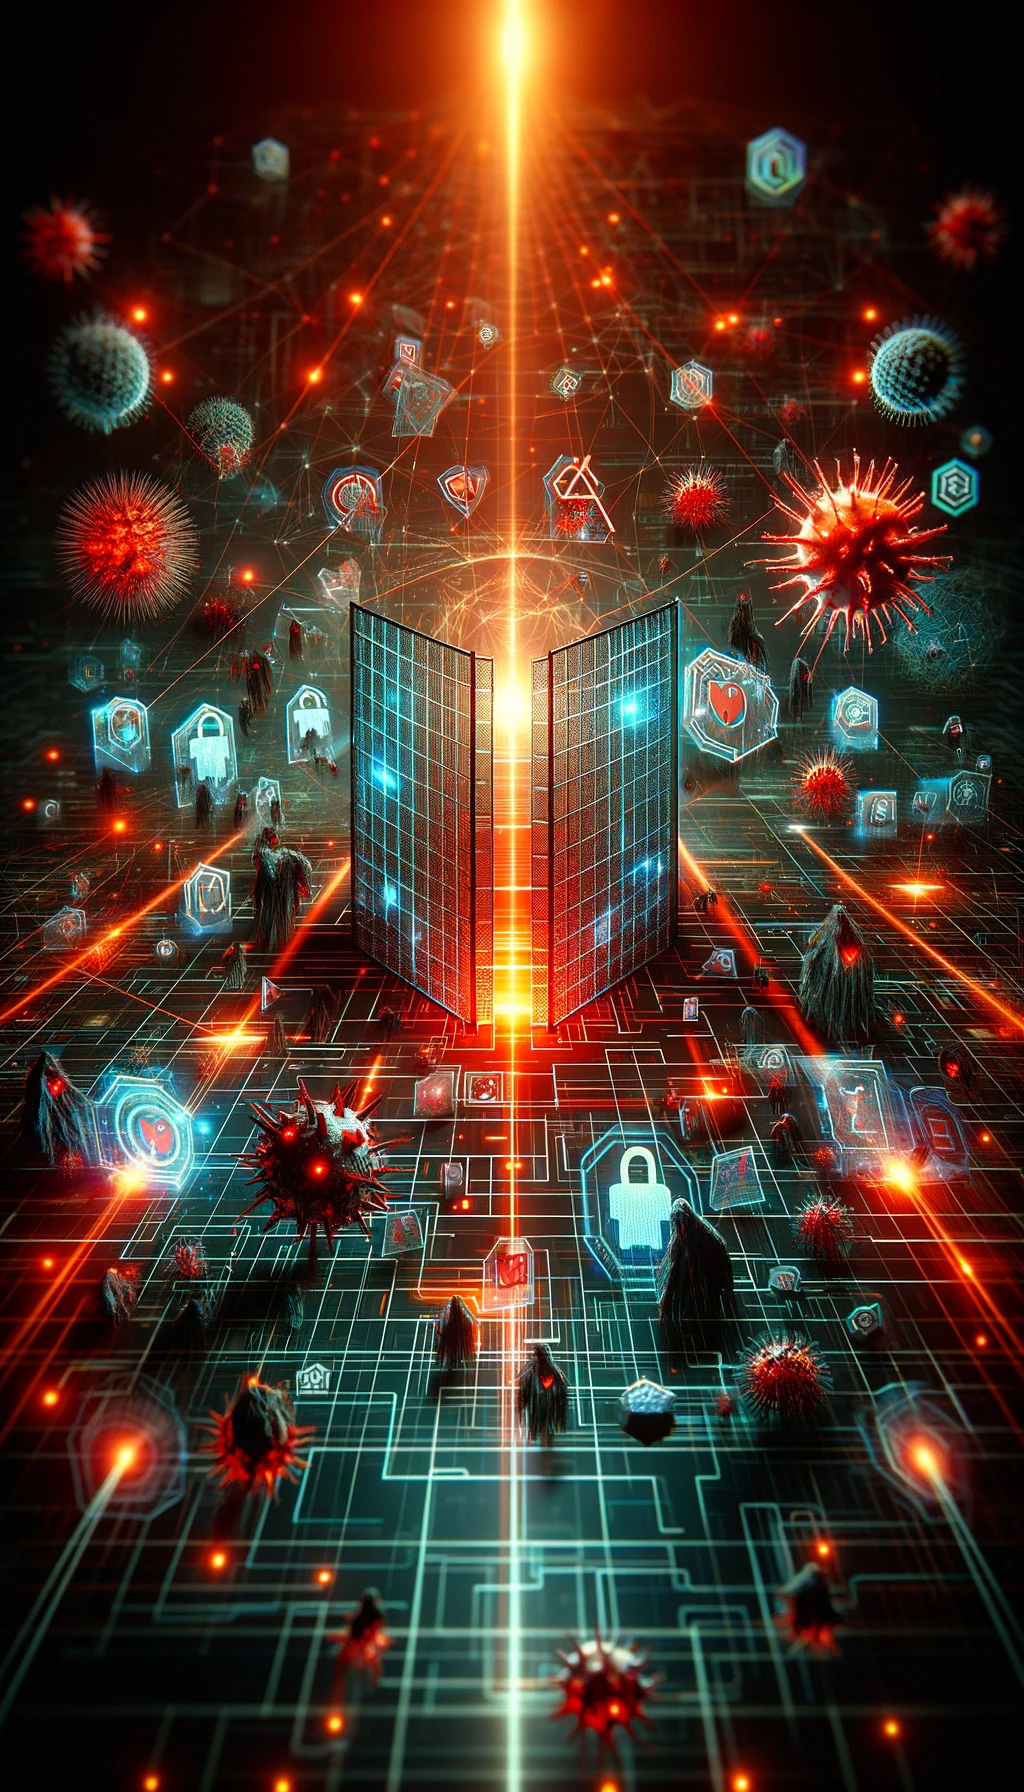 cyber security threats being stopped. The scene shows a large, advanced digital firewall in the center, glowing in red and